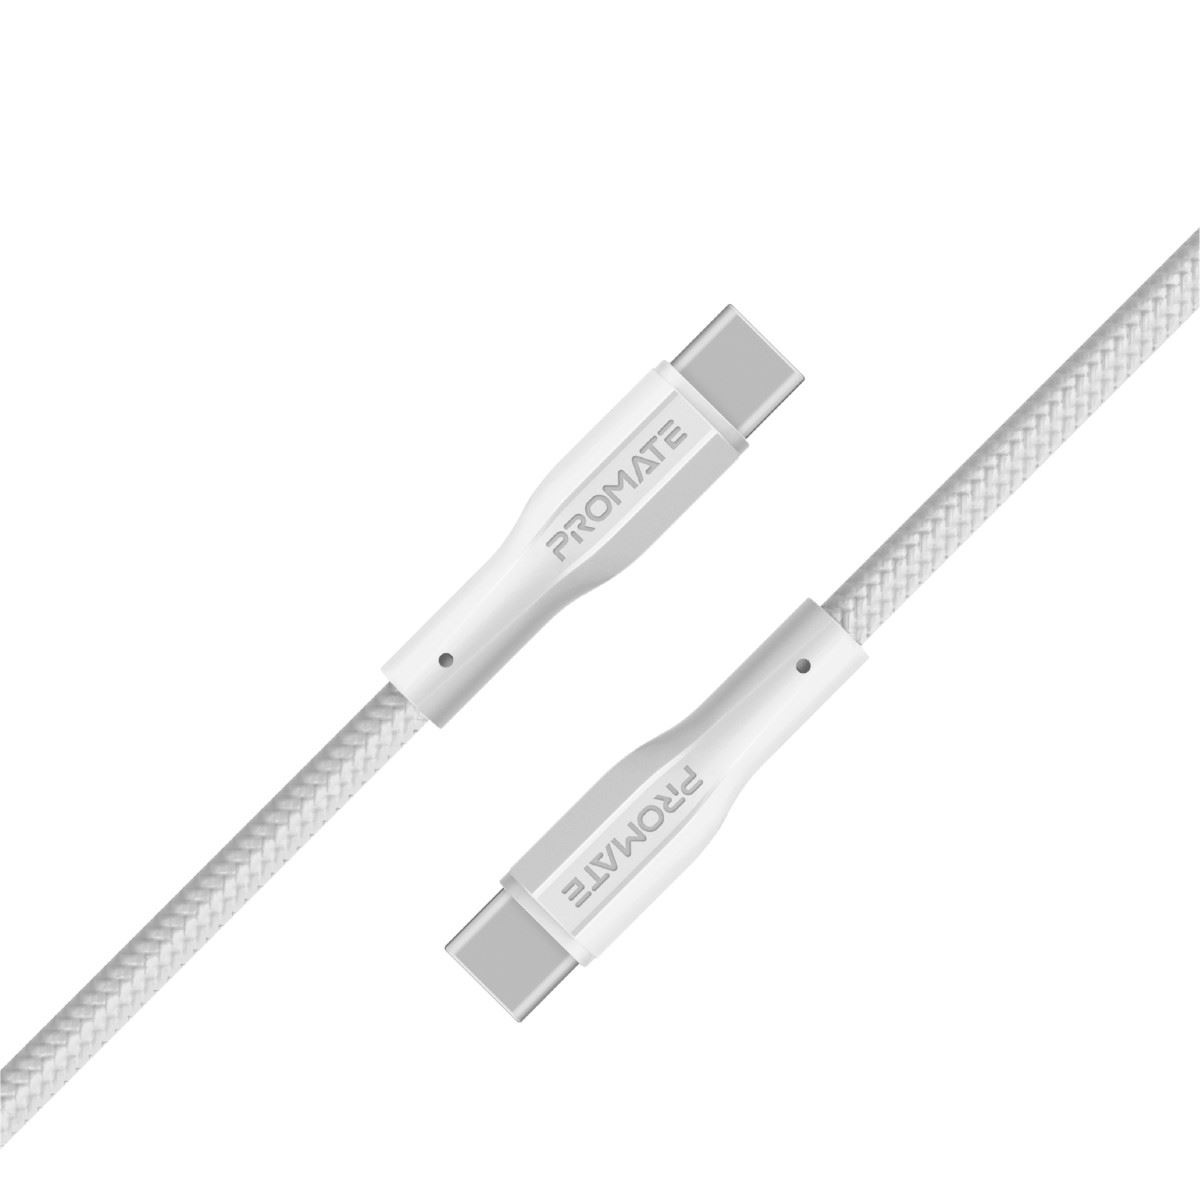 PROMATE 1M USB-C to USB-C Super Flexible Cable. Supports 2A